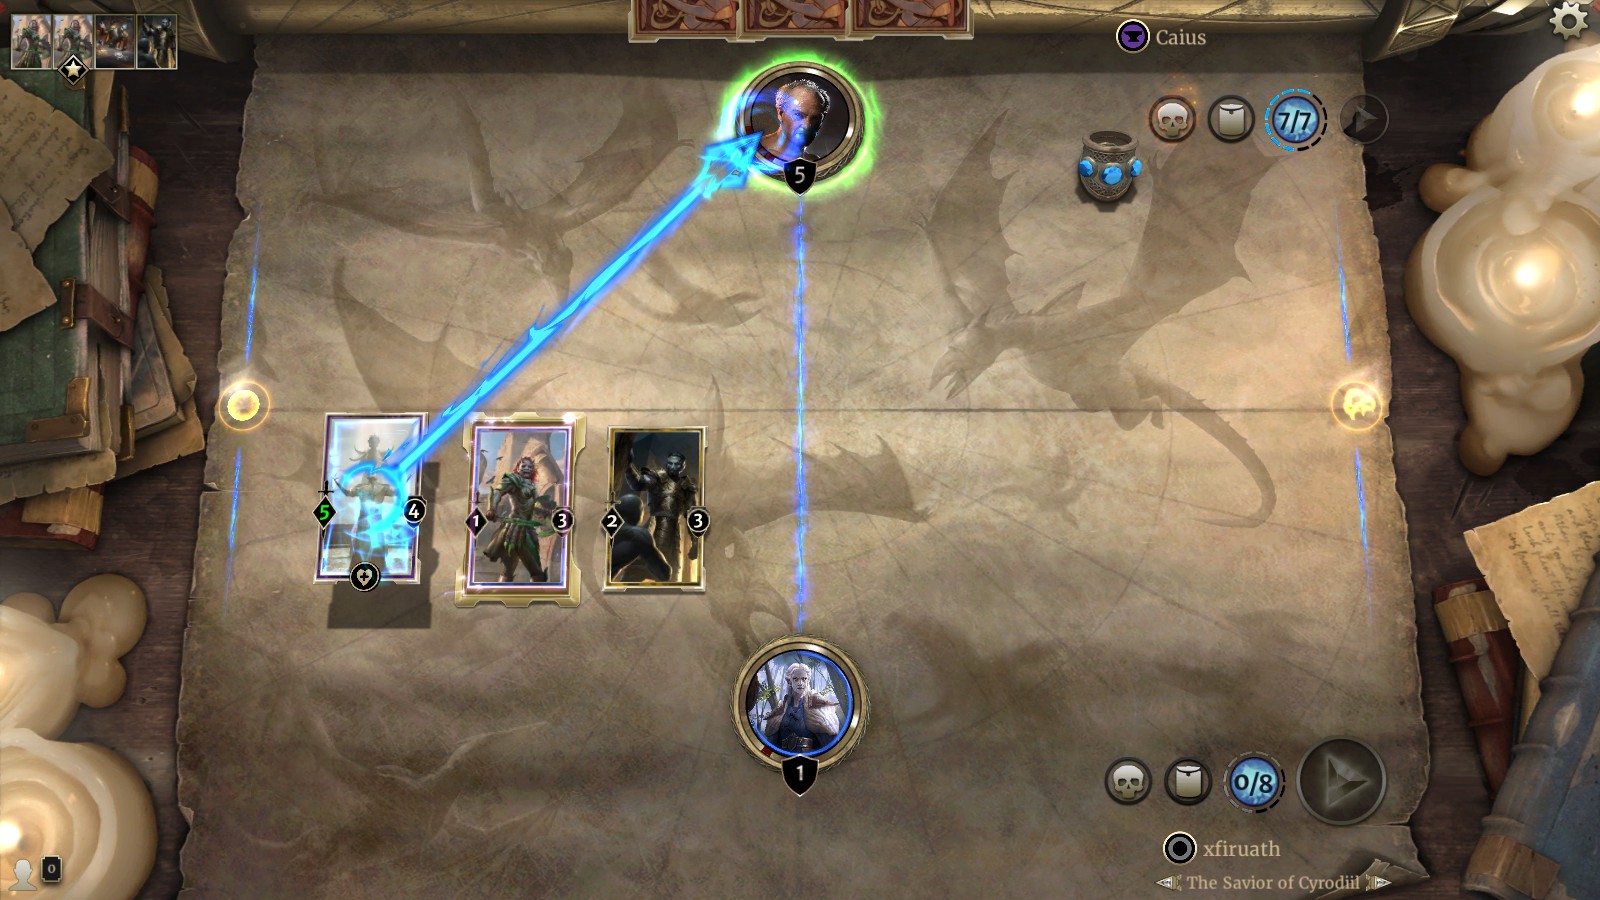 Tribunal Initiation Puzzle in Houses of Morrowind, the new expansion for Elder Scrolls Legends